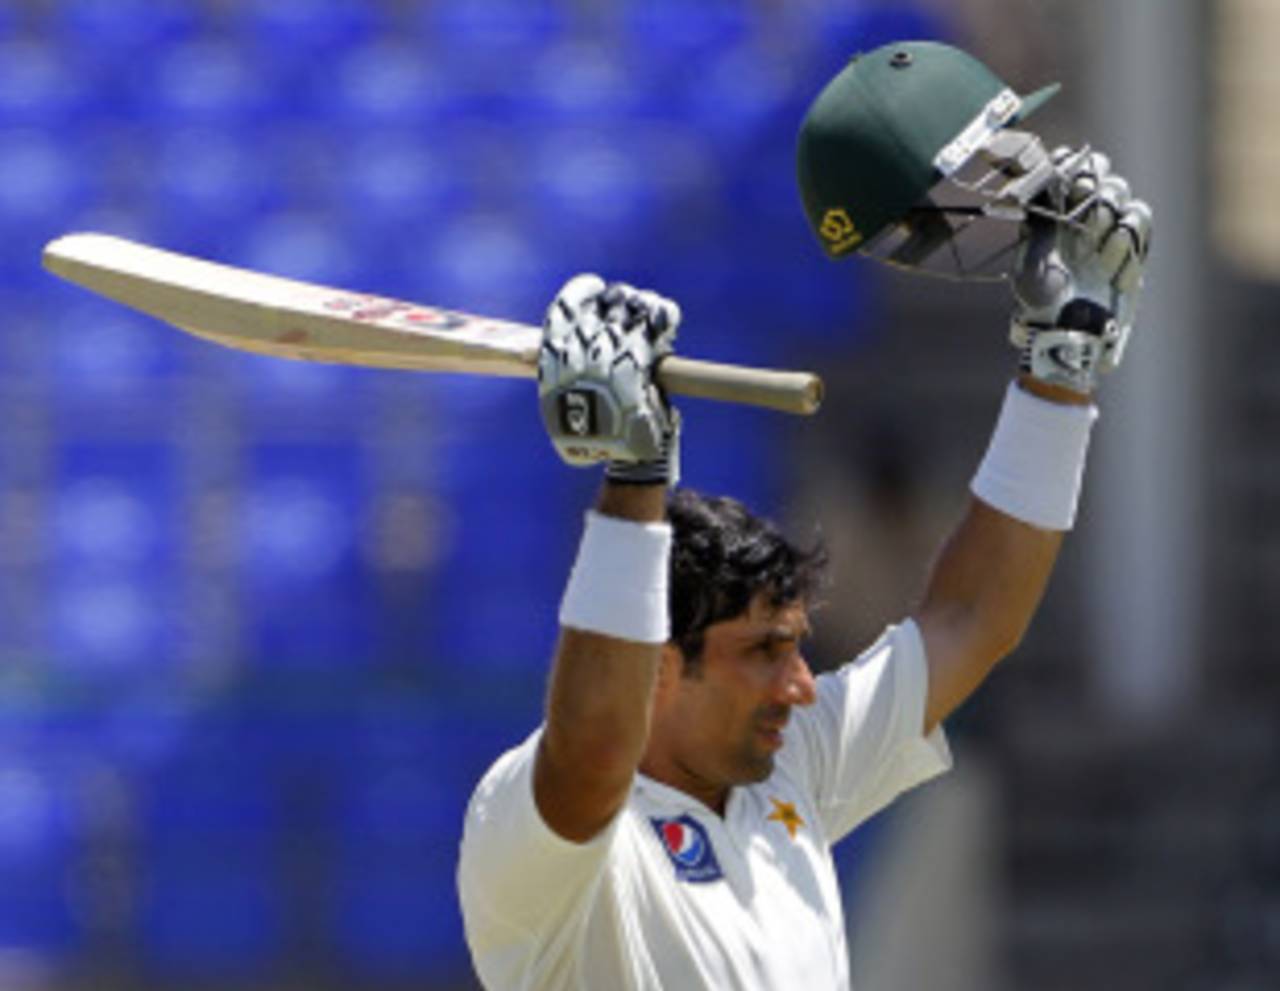 Misbah-ul-Haq's acknowledges the applause on getting to his ton, West Indies v Pakistan, 2nd Test, St Kitts, 4th day, May 23, 2011